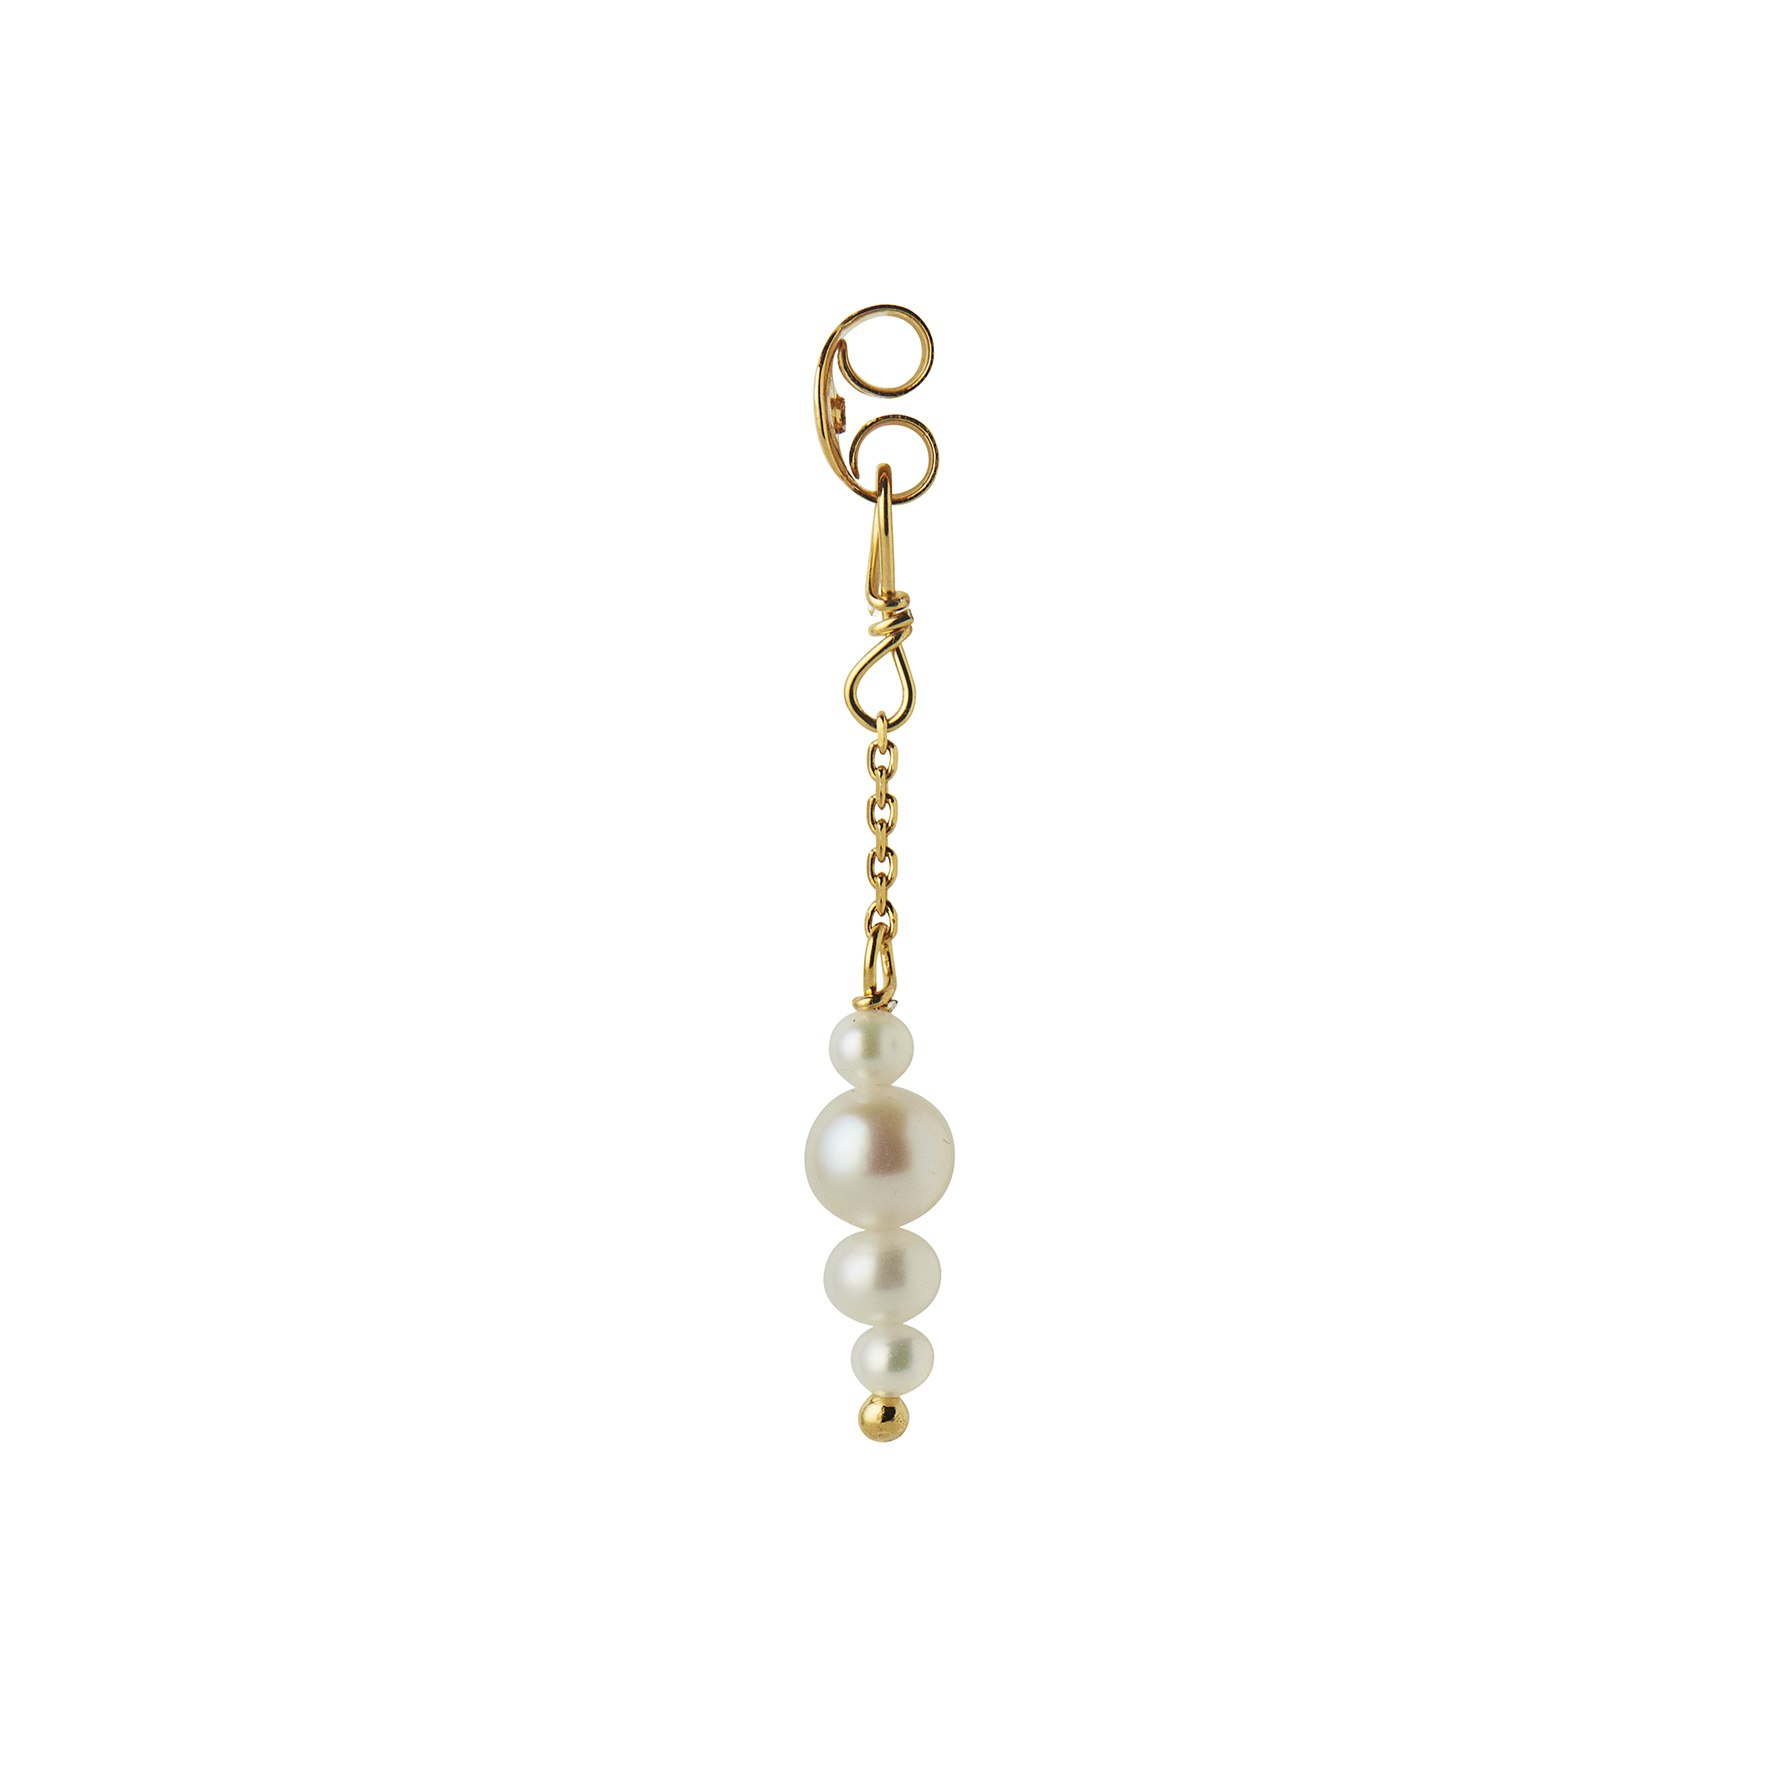 Petit Pearl Berries Behind Ear Earring fra STINE A Jewelry i Sølv Sterling 925